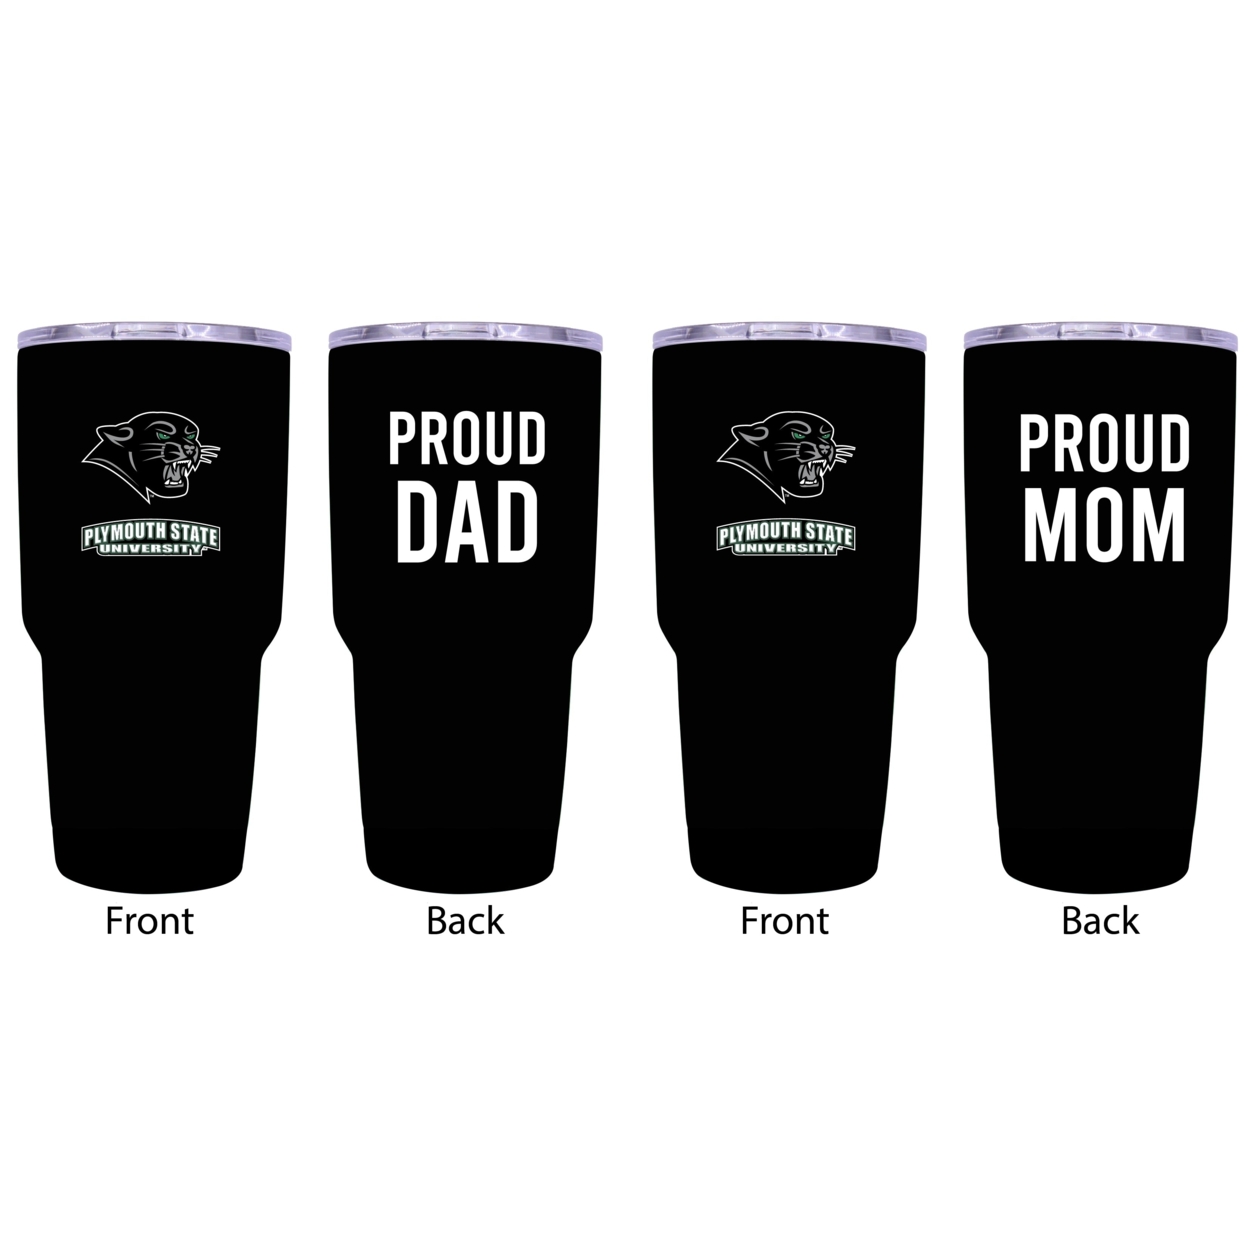 Plymouth State University Proud Mom And Dad 24 Oz Insulated Stainless Steel Tumblers 2 Pack Black.